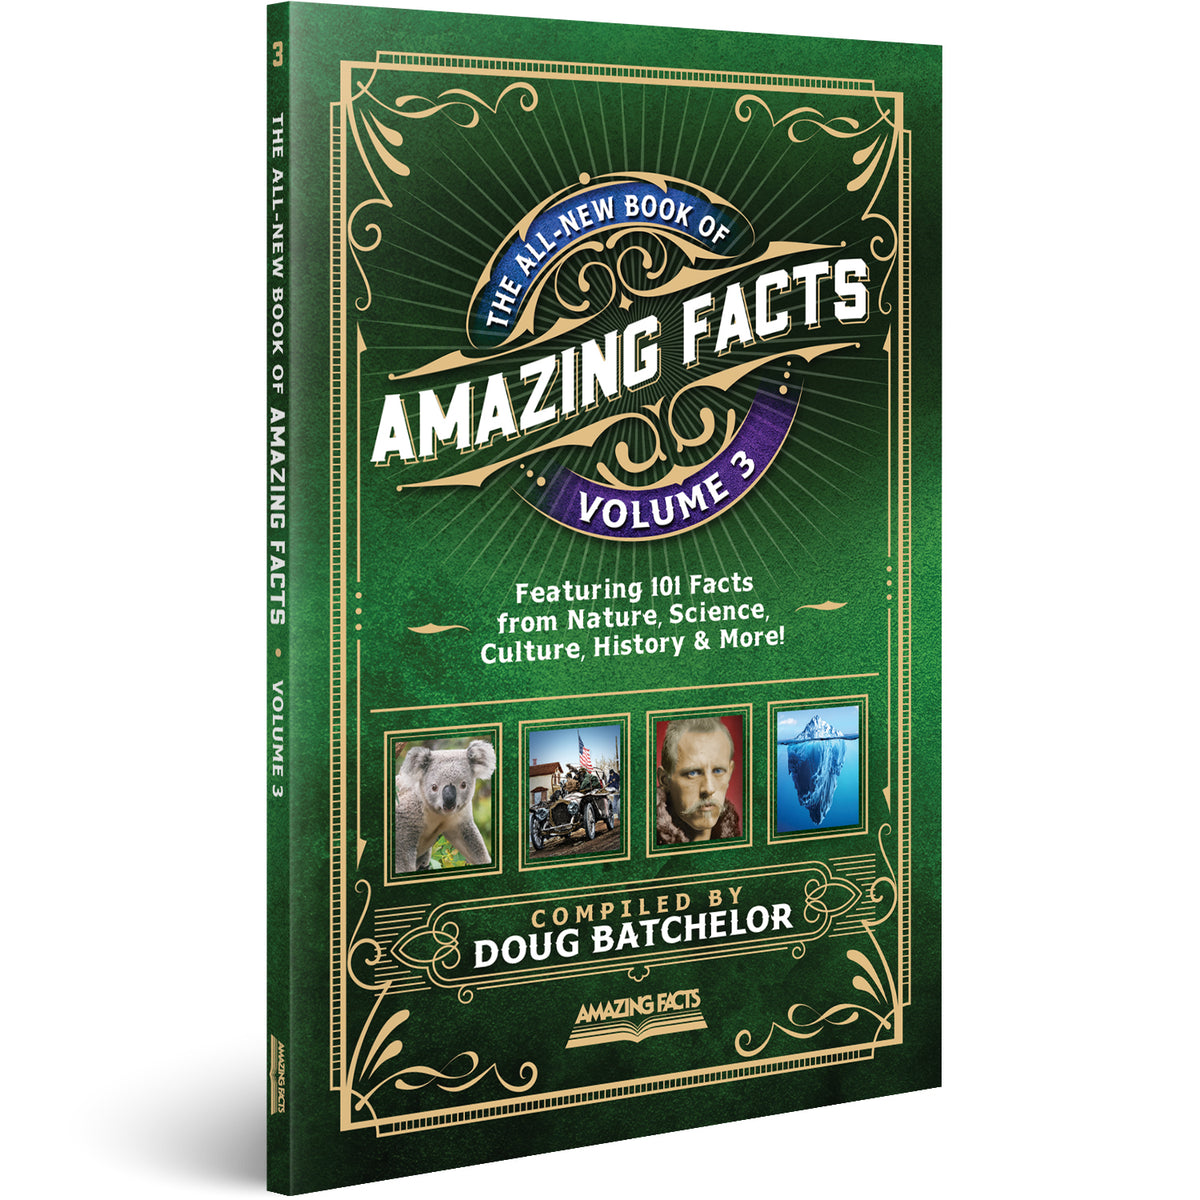 The All-New Book of Amazing Facts Vol 3 by Doug Batchelor